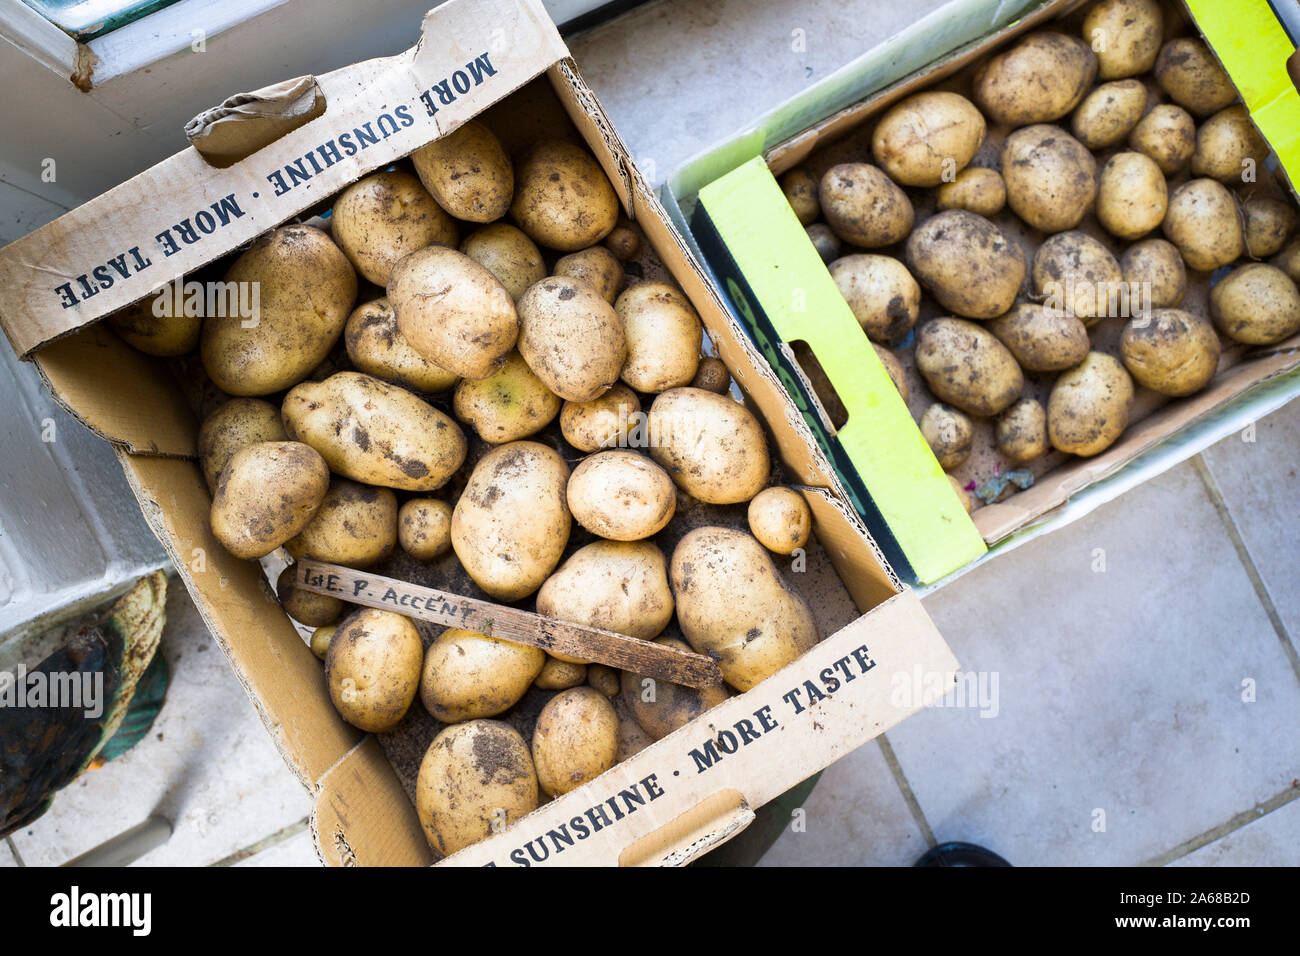 Freshly dug first early potatoes Accent in boxes ready for eating in UK Stock Photo